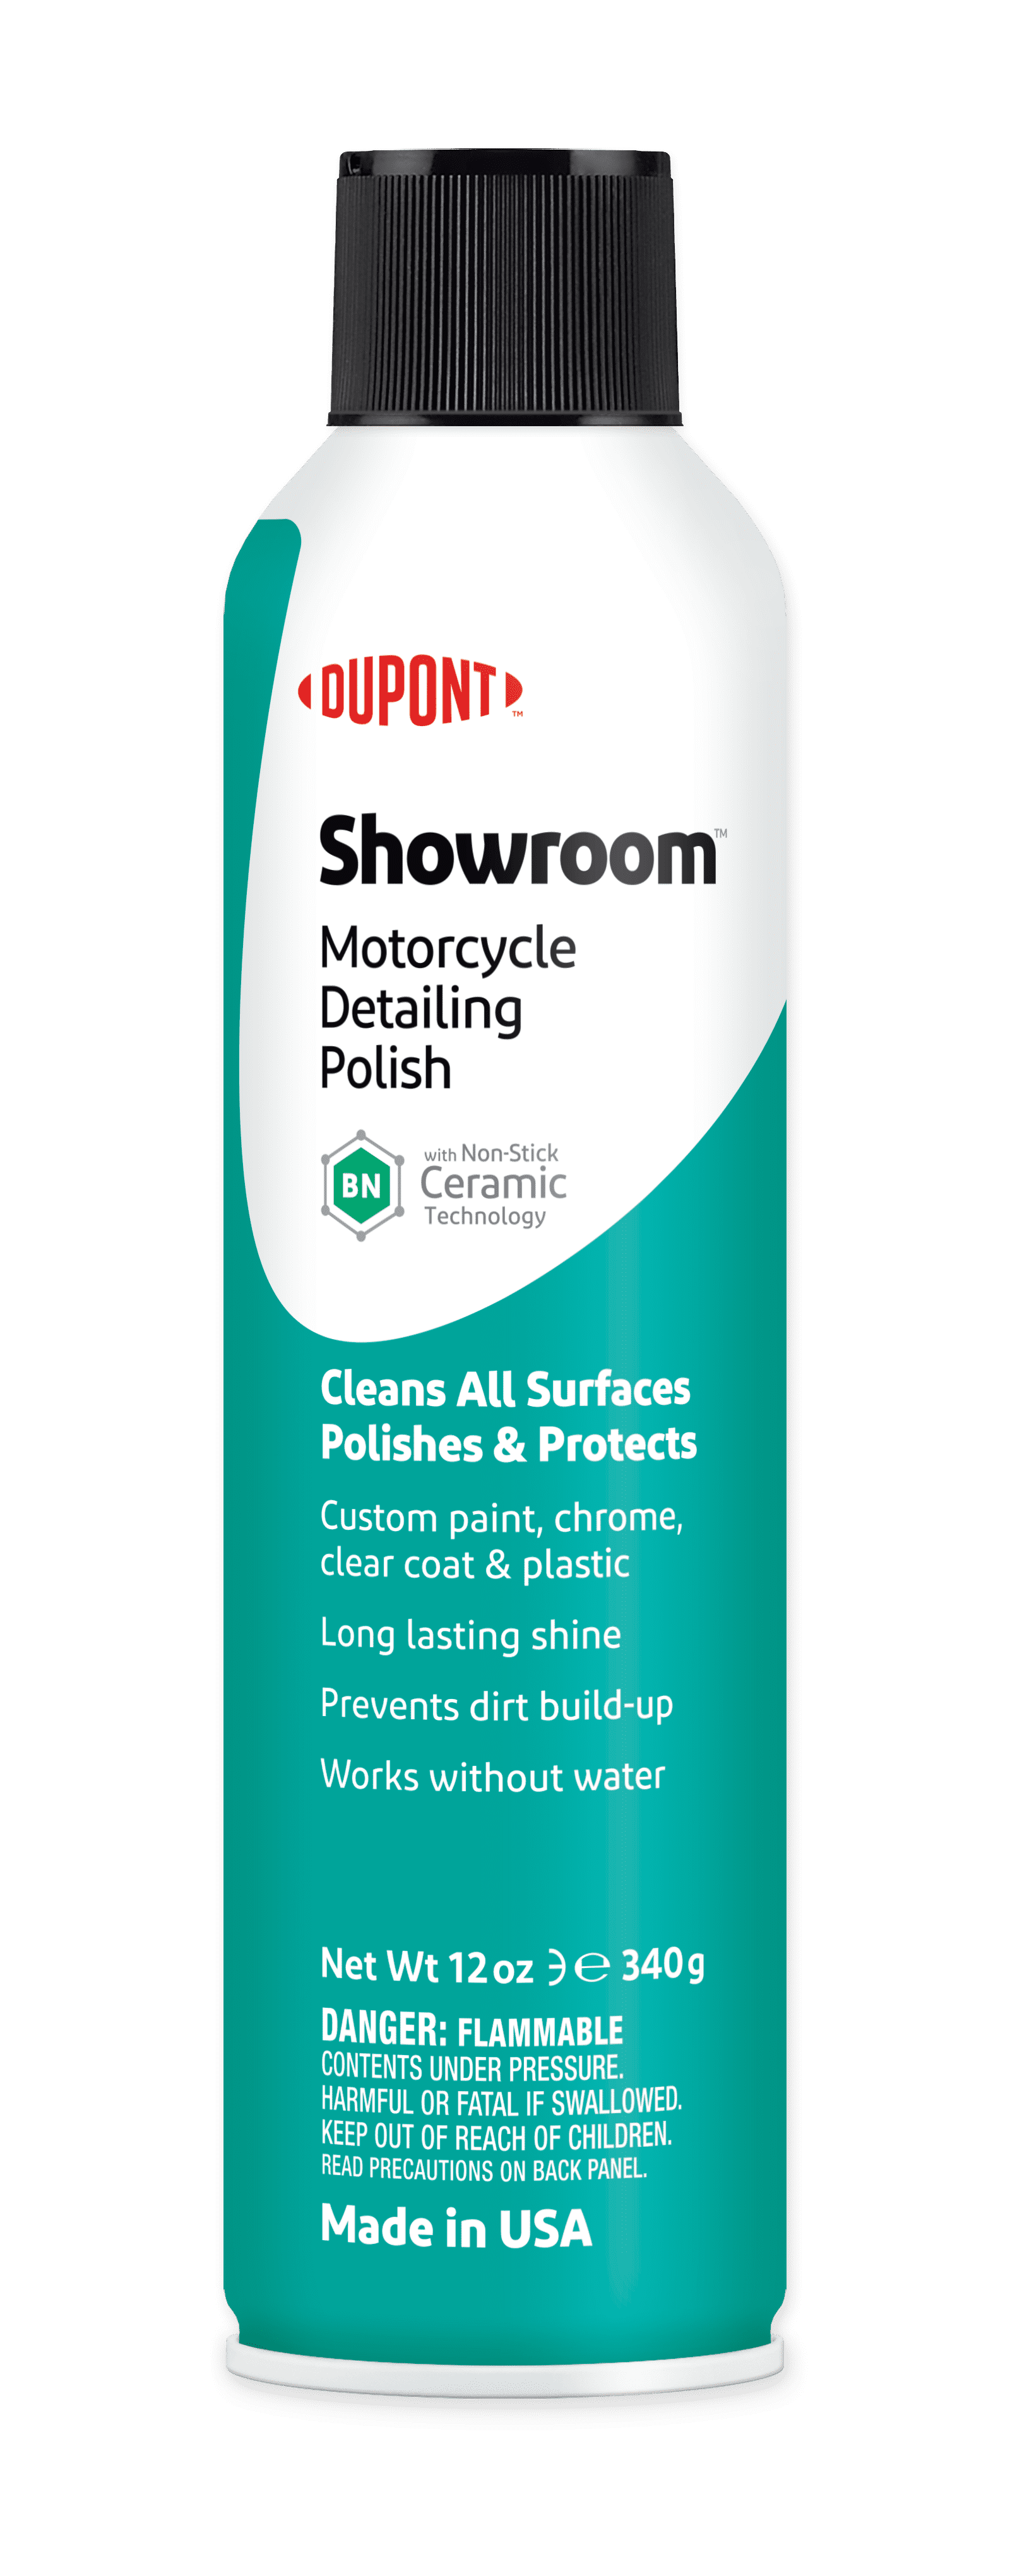 DuPont Showroom Motorcycle Detailing Polish with Non-Stick Ceramic Technology